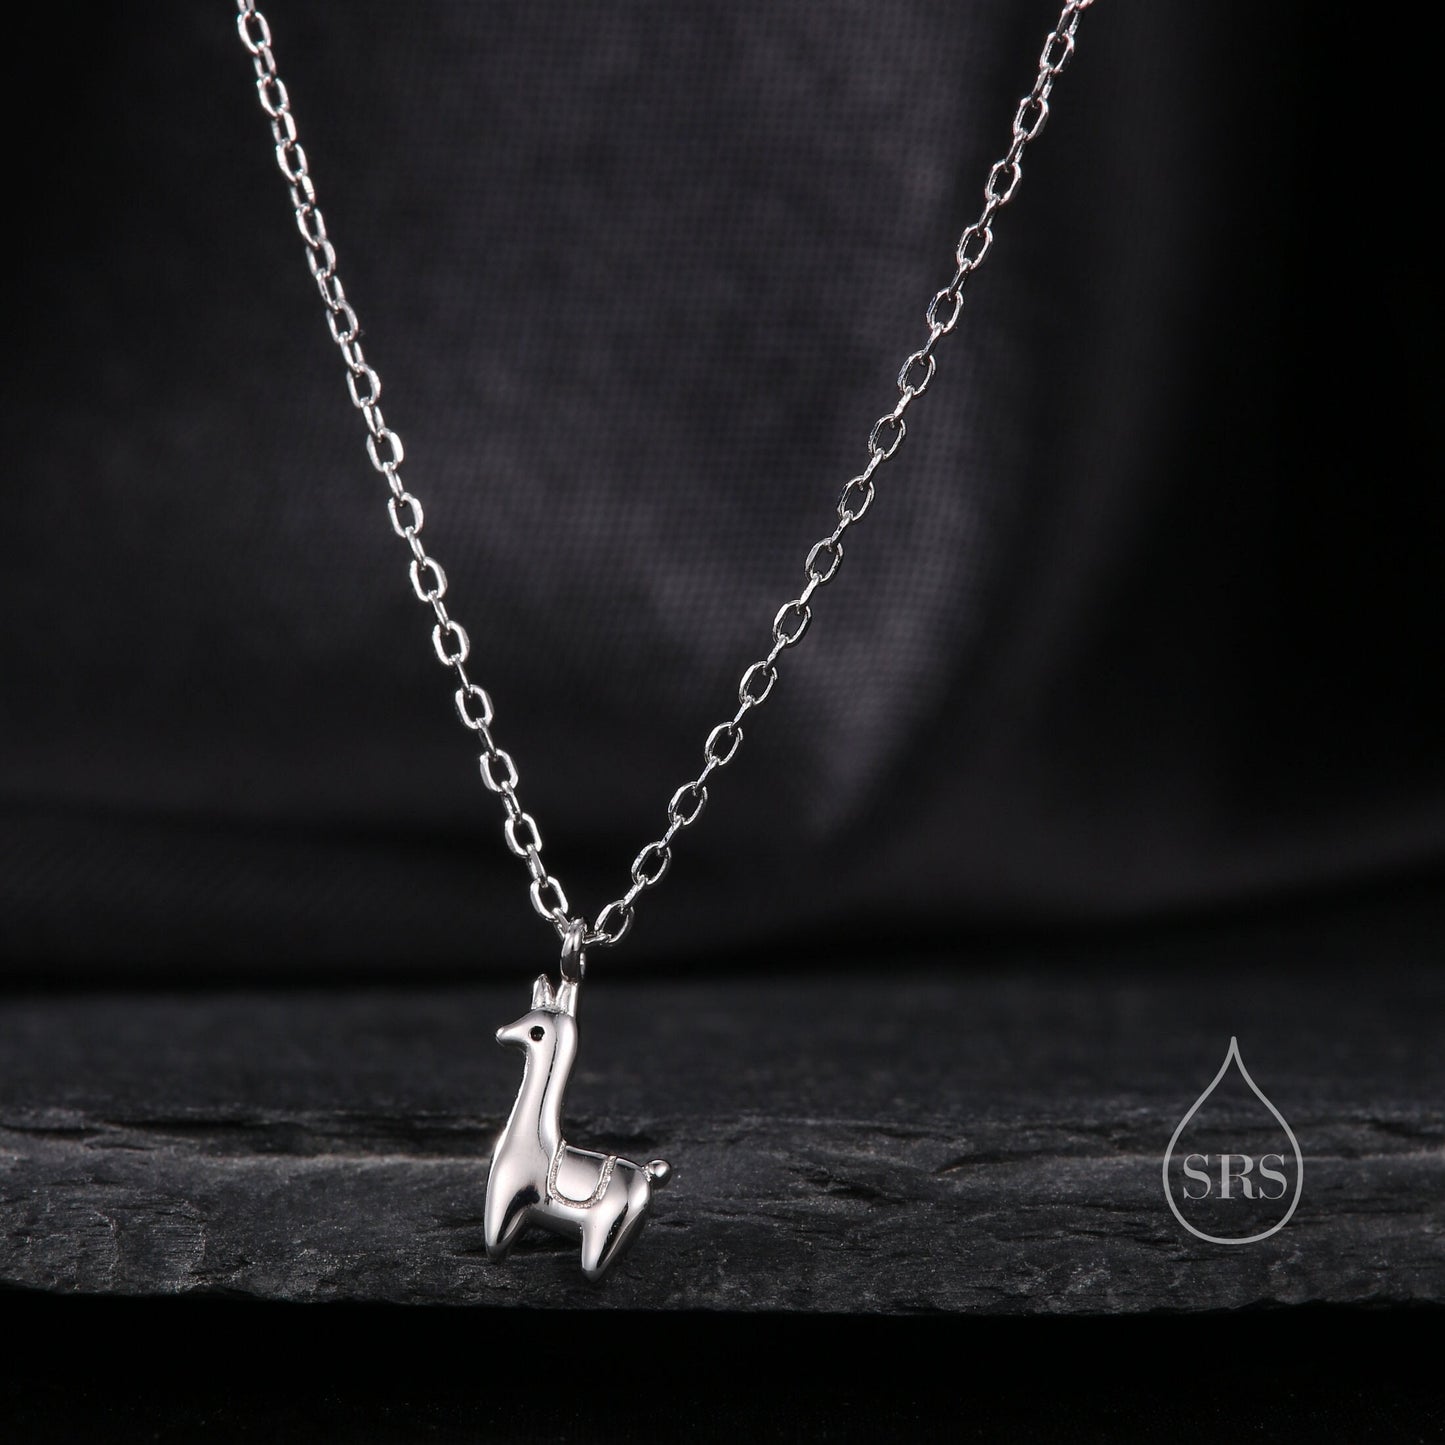 Extra Tiny Llama Pendant Necklace in Sterling Silver，Adjustable 16 - 18" - Silver or Gold or Rose Gold, Cute Quirky and Fun Jewellery